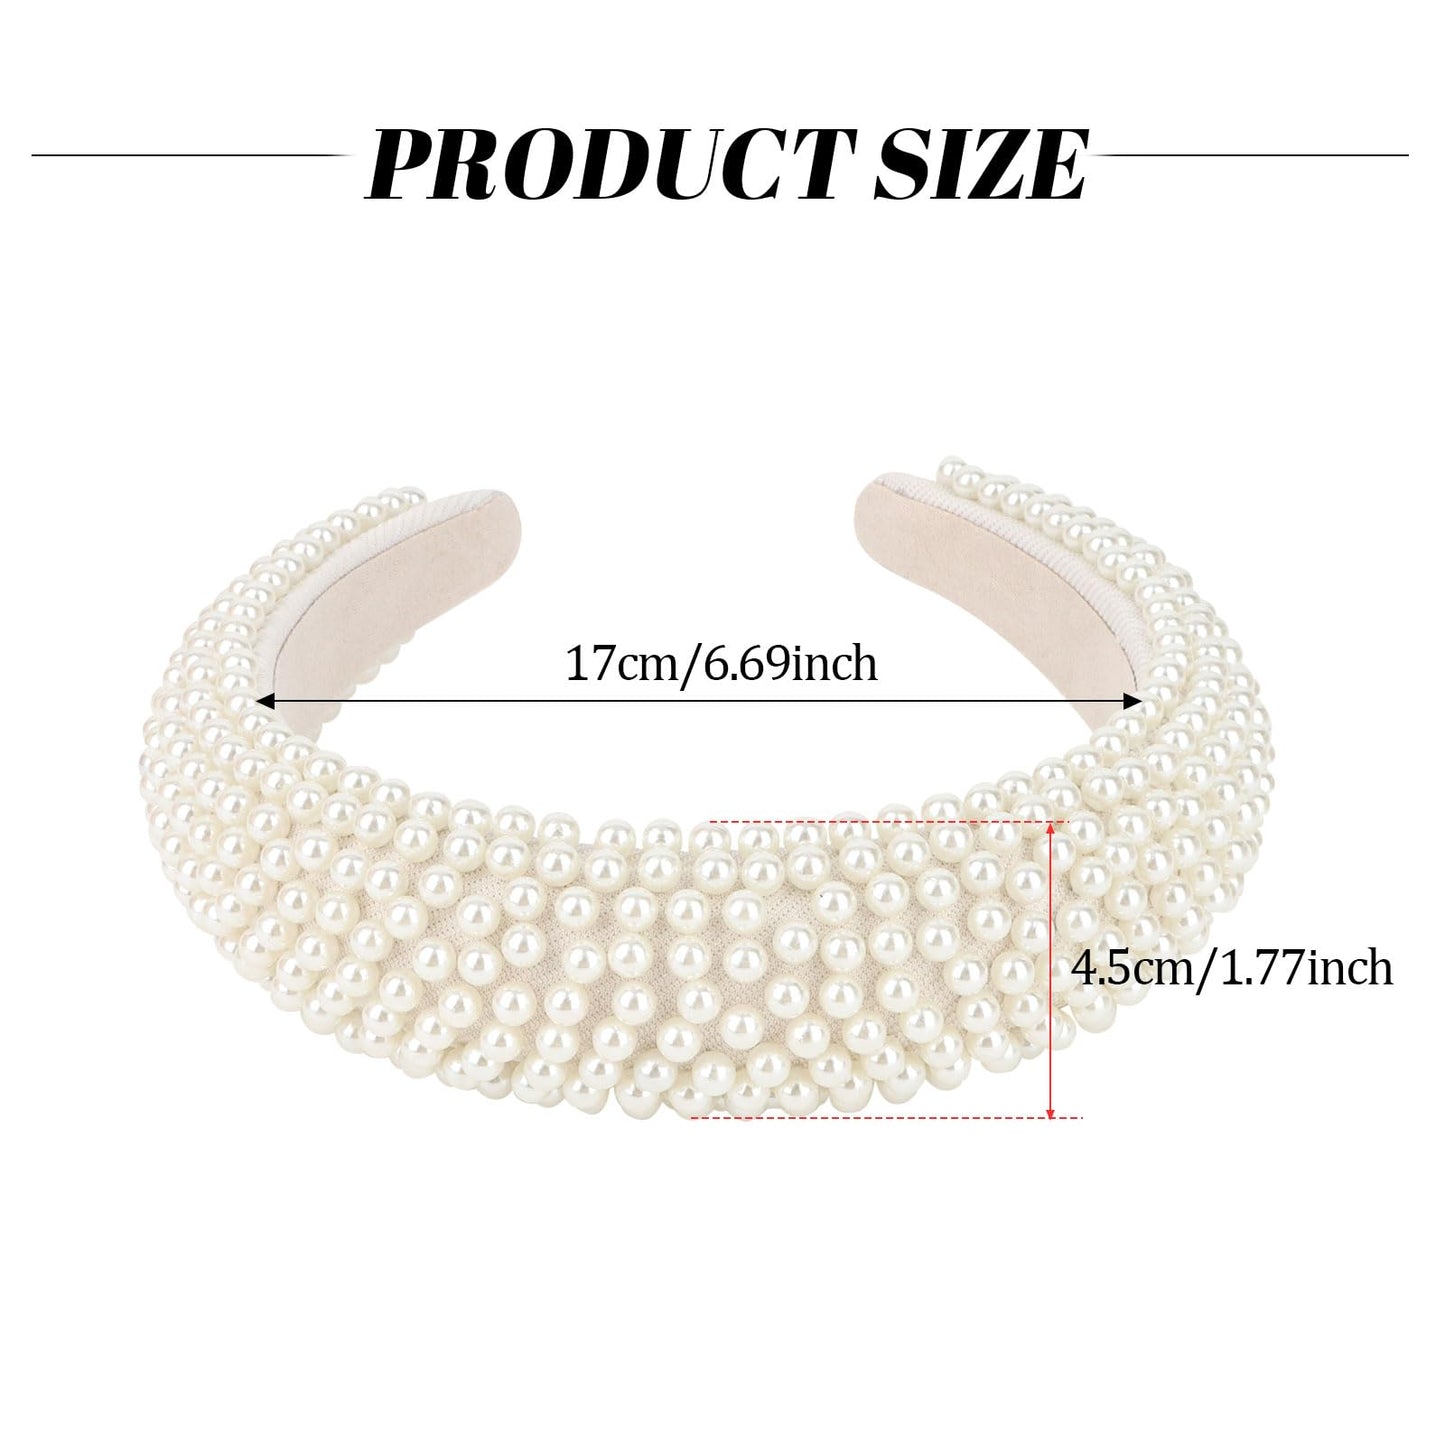 YISSION 1PC White Pearl Headband for Women Non Slip Jeweled Head Band Sparkly Beaded Hairband Fashion Padded Headbands for Women Wedding Bridal Headband Hair Accessories for Women Girls